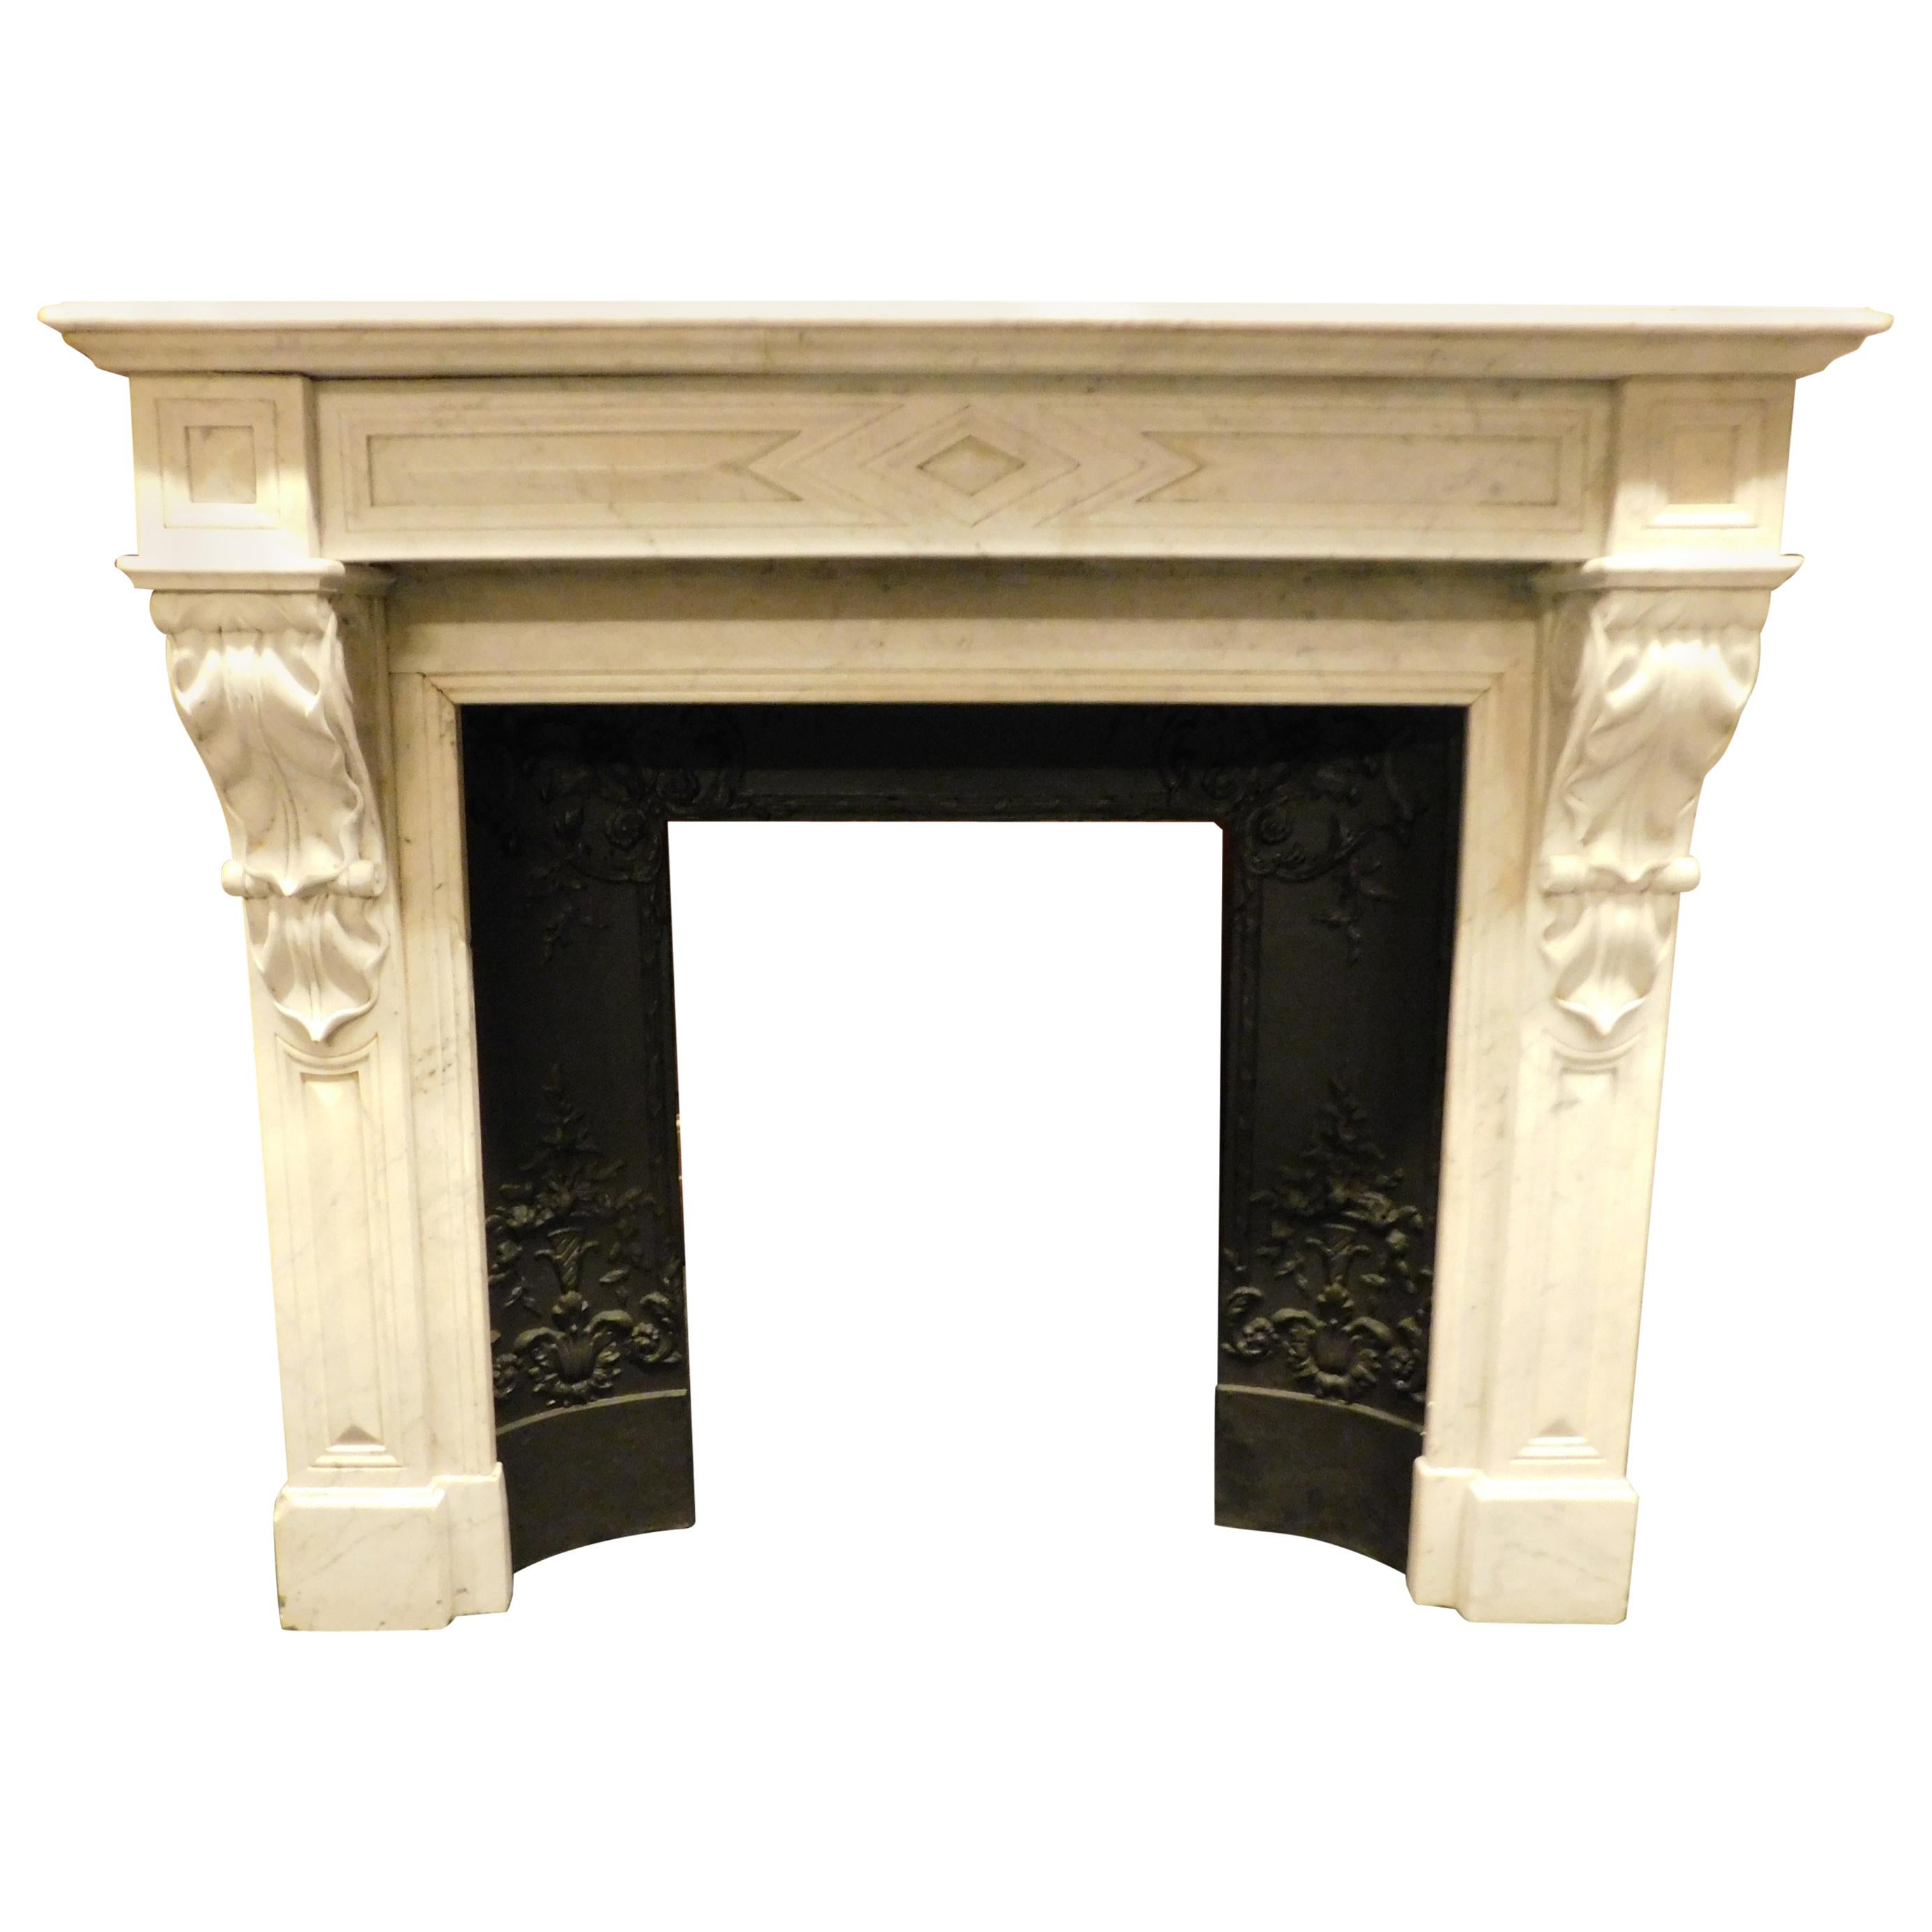 Antique White Carrara Marble Fireplace Mantel, Carved, 19th Century France